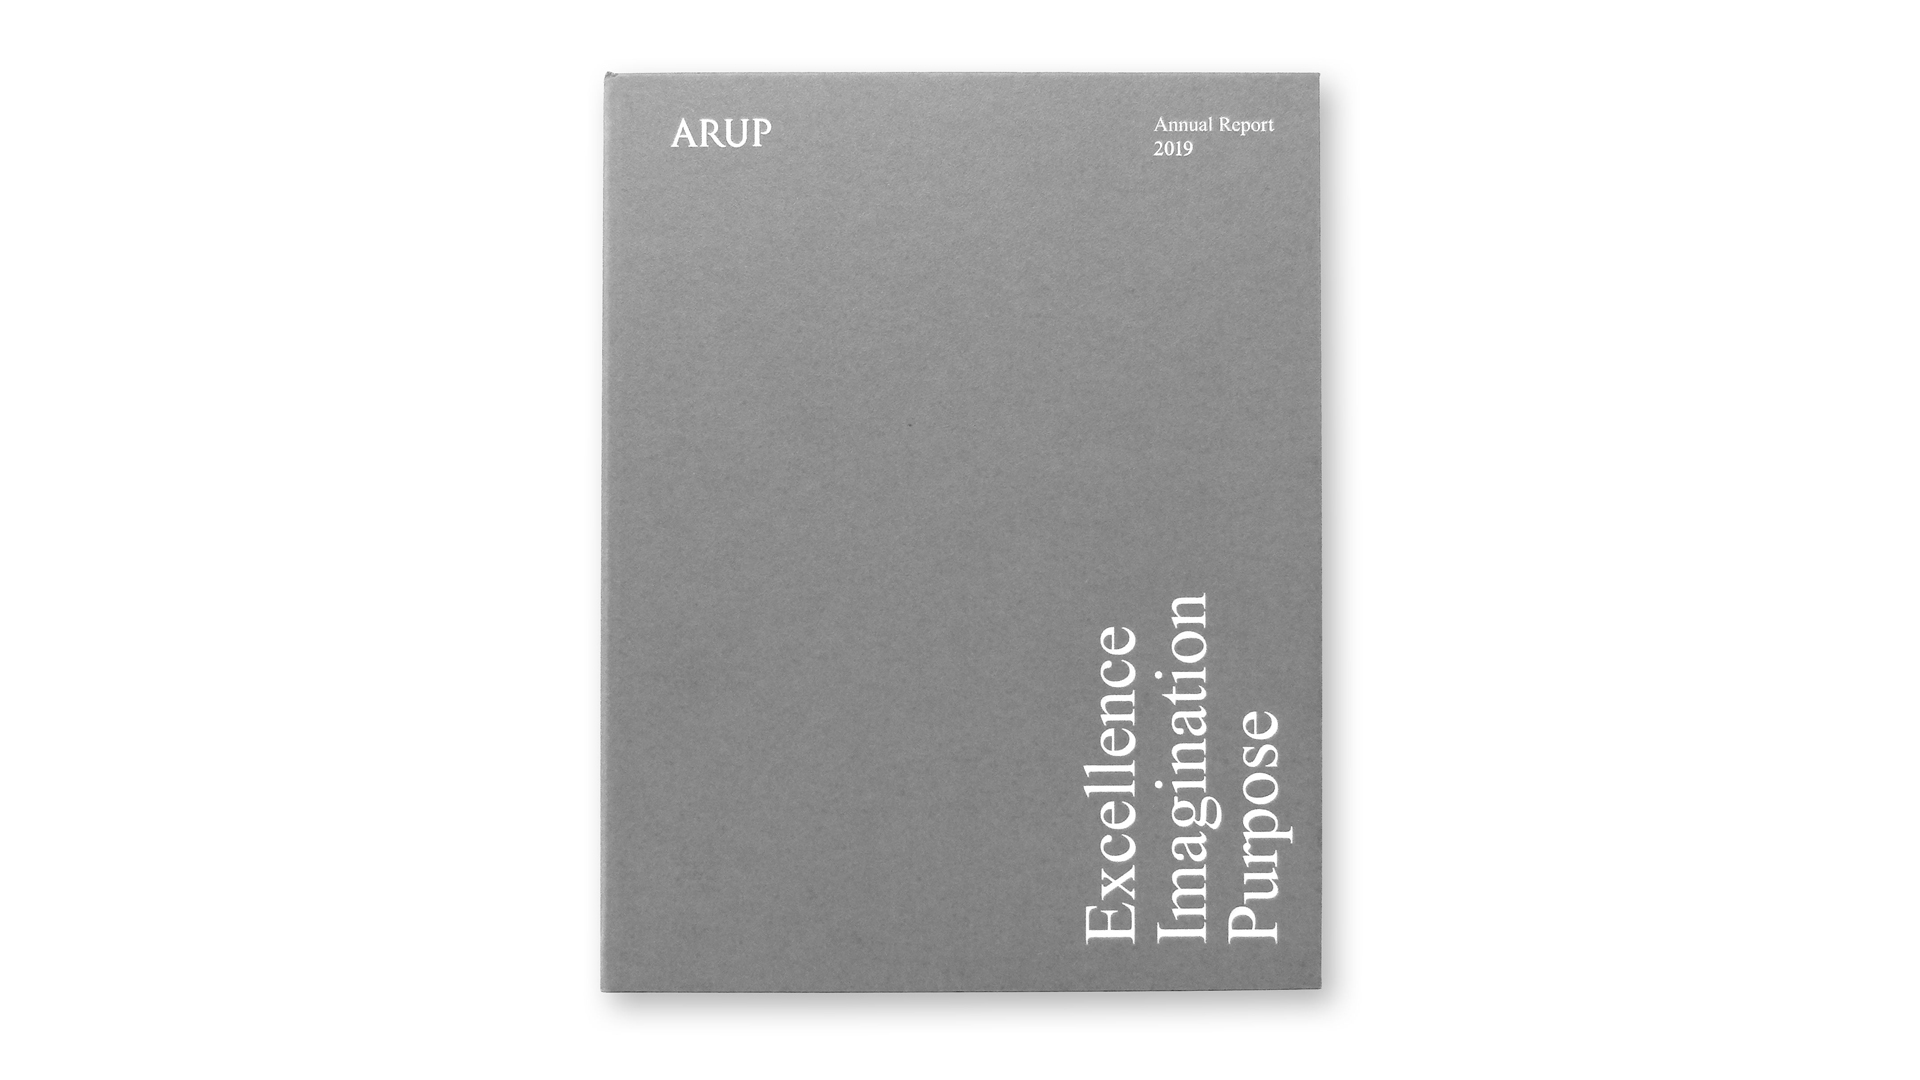 Arup 2019 Annual Report - PaperSpecs